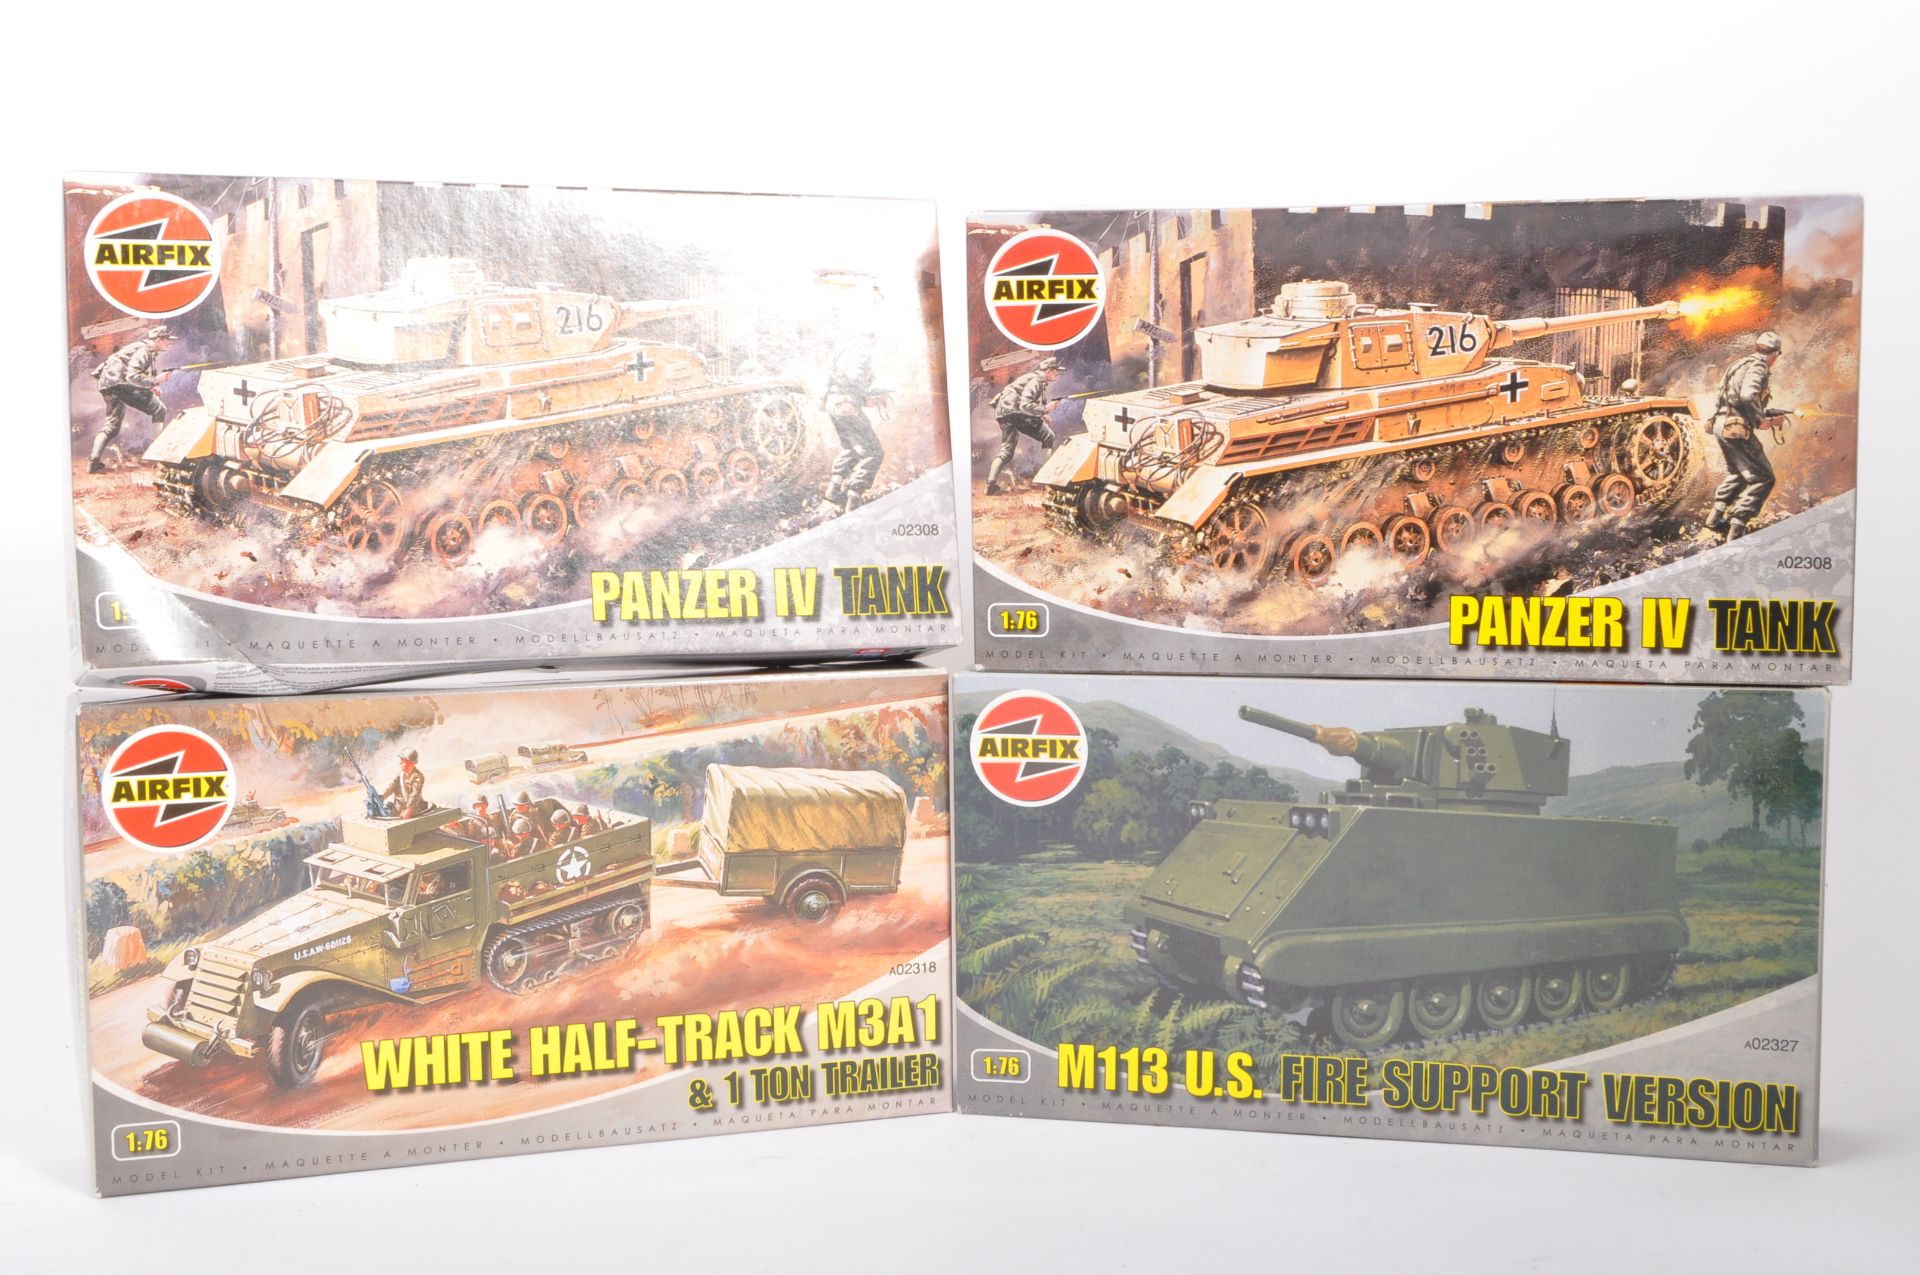 MODEL KITS - COLLECTION OF AIRFIX PLASTIC MODEL KITS - Image 5 of 6